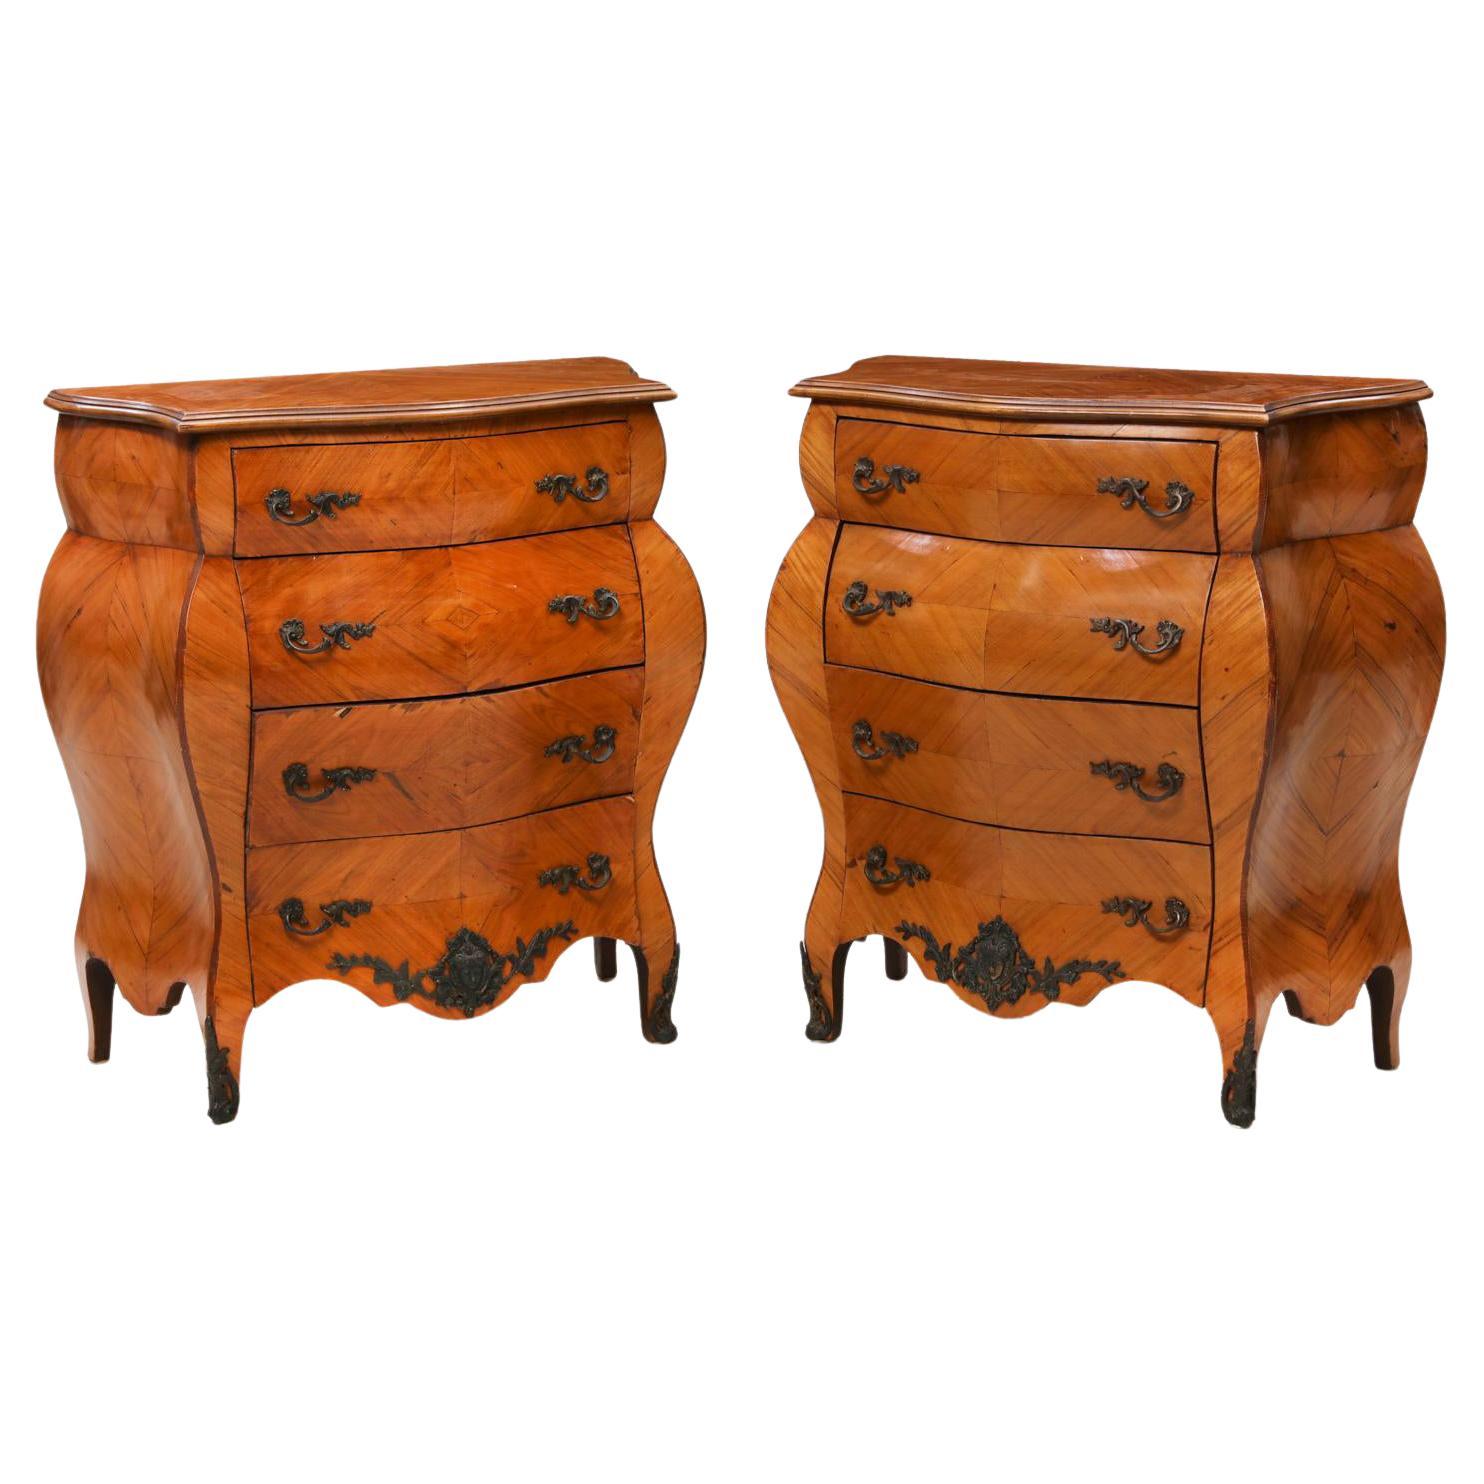 Pair of Italian Rococo Style Night Stands